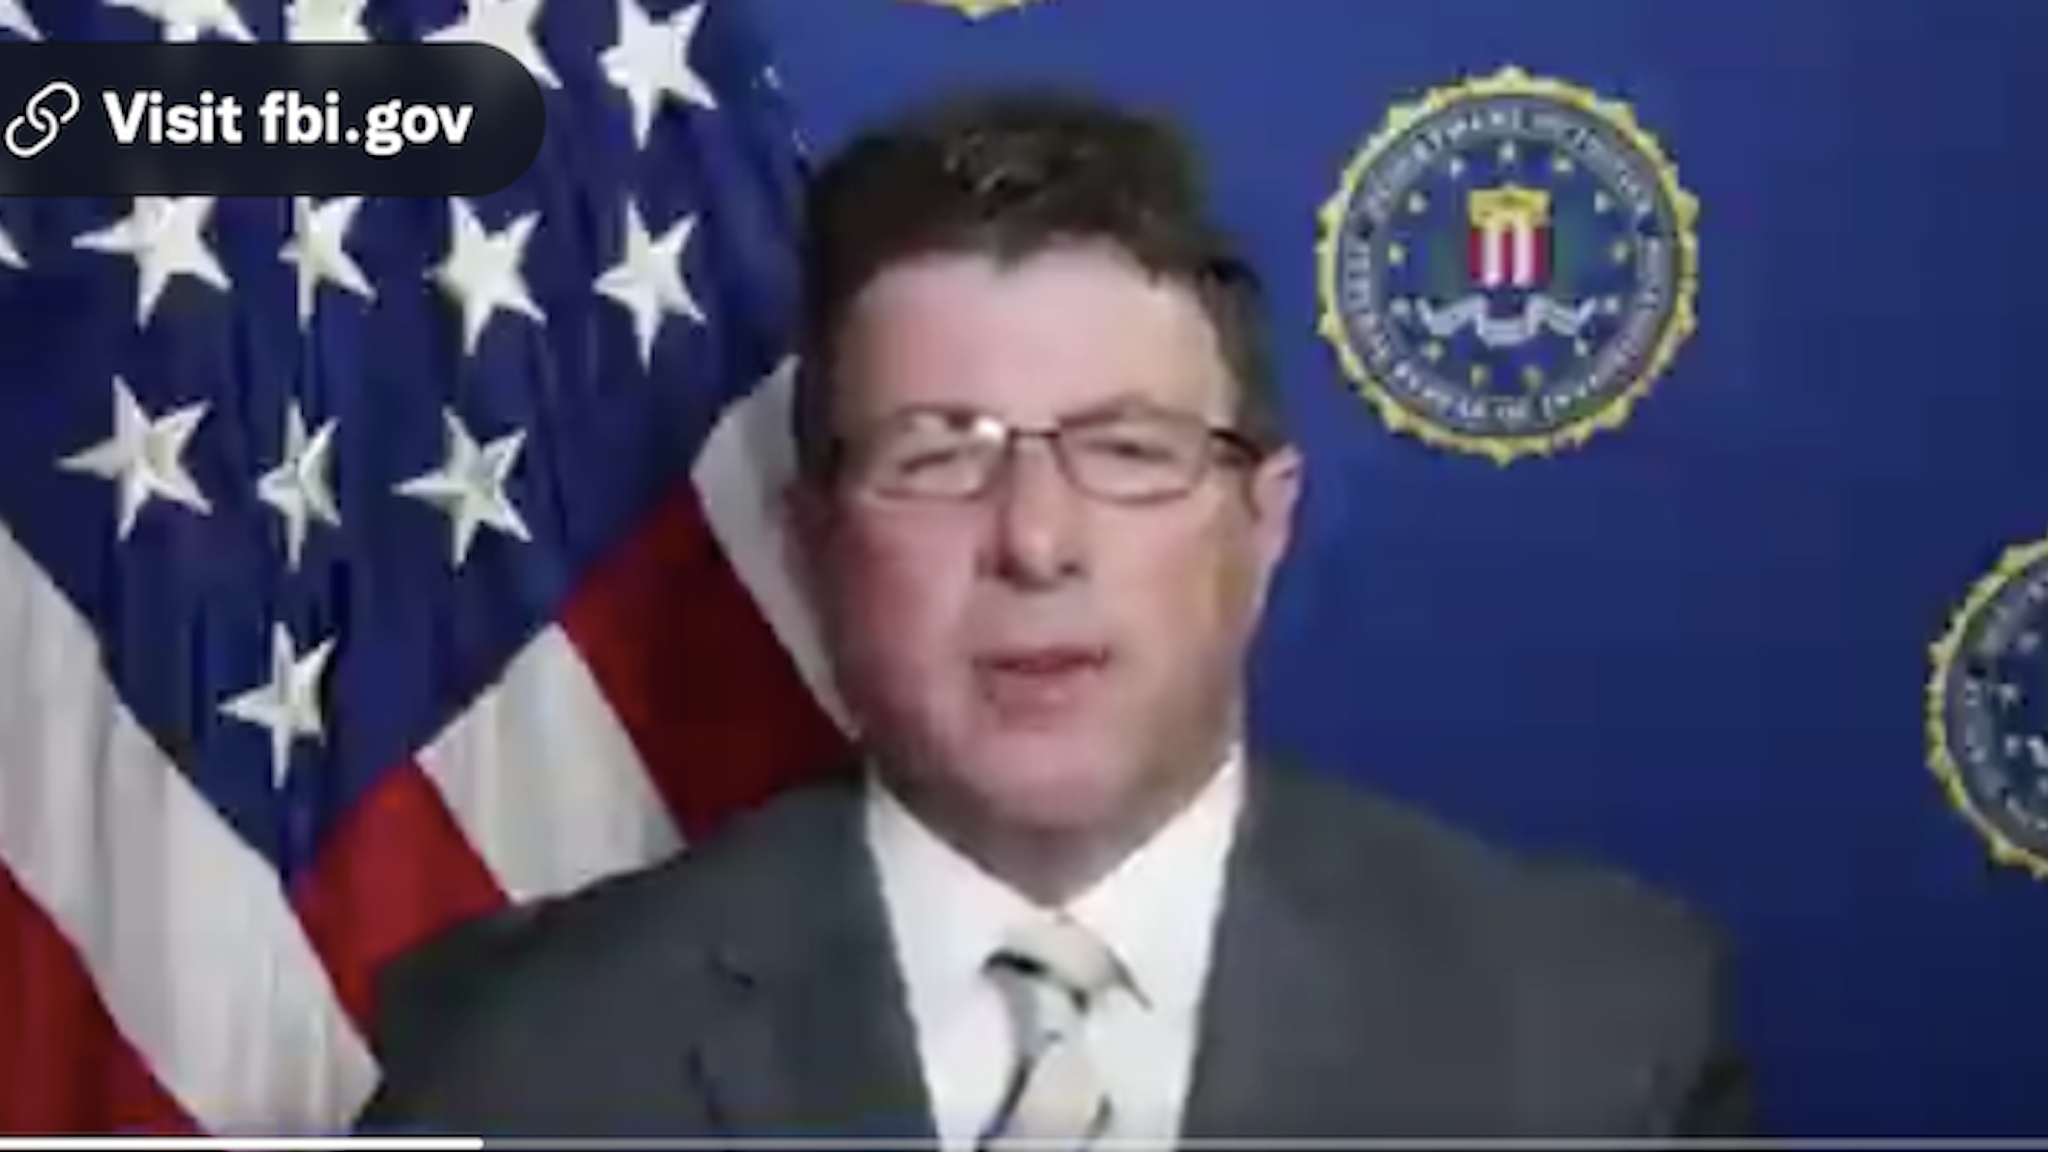 FBI Special Agent in Charge Timothy Thibault reportedly resigned under pressure after bureau bosses said he hid evidence from superiors.